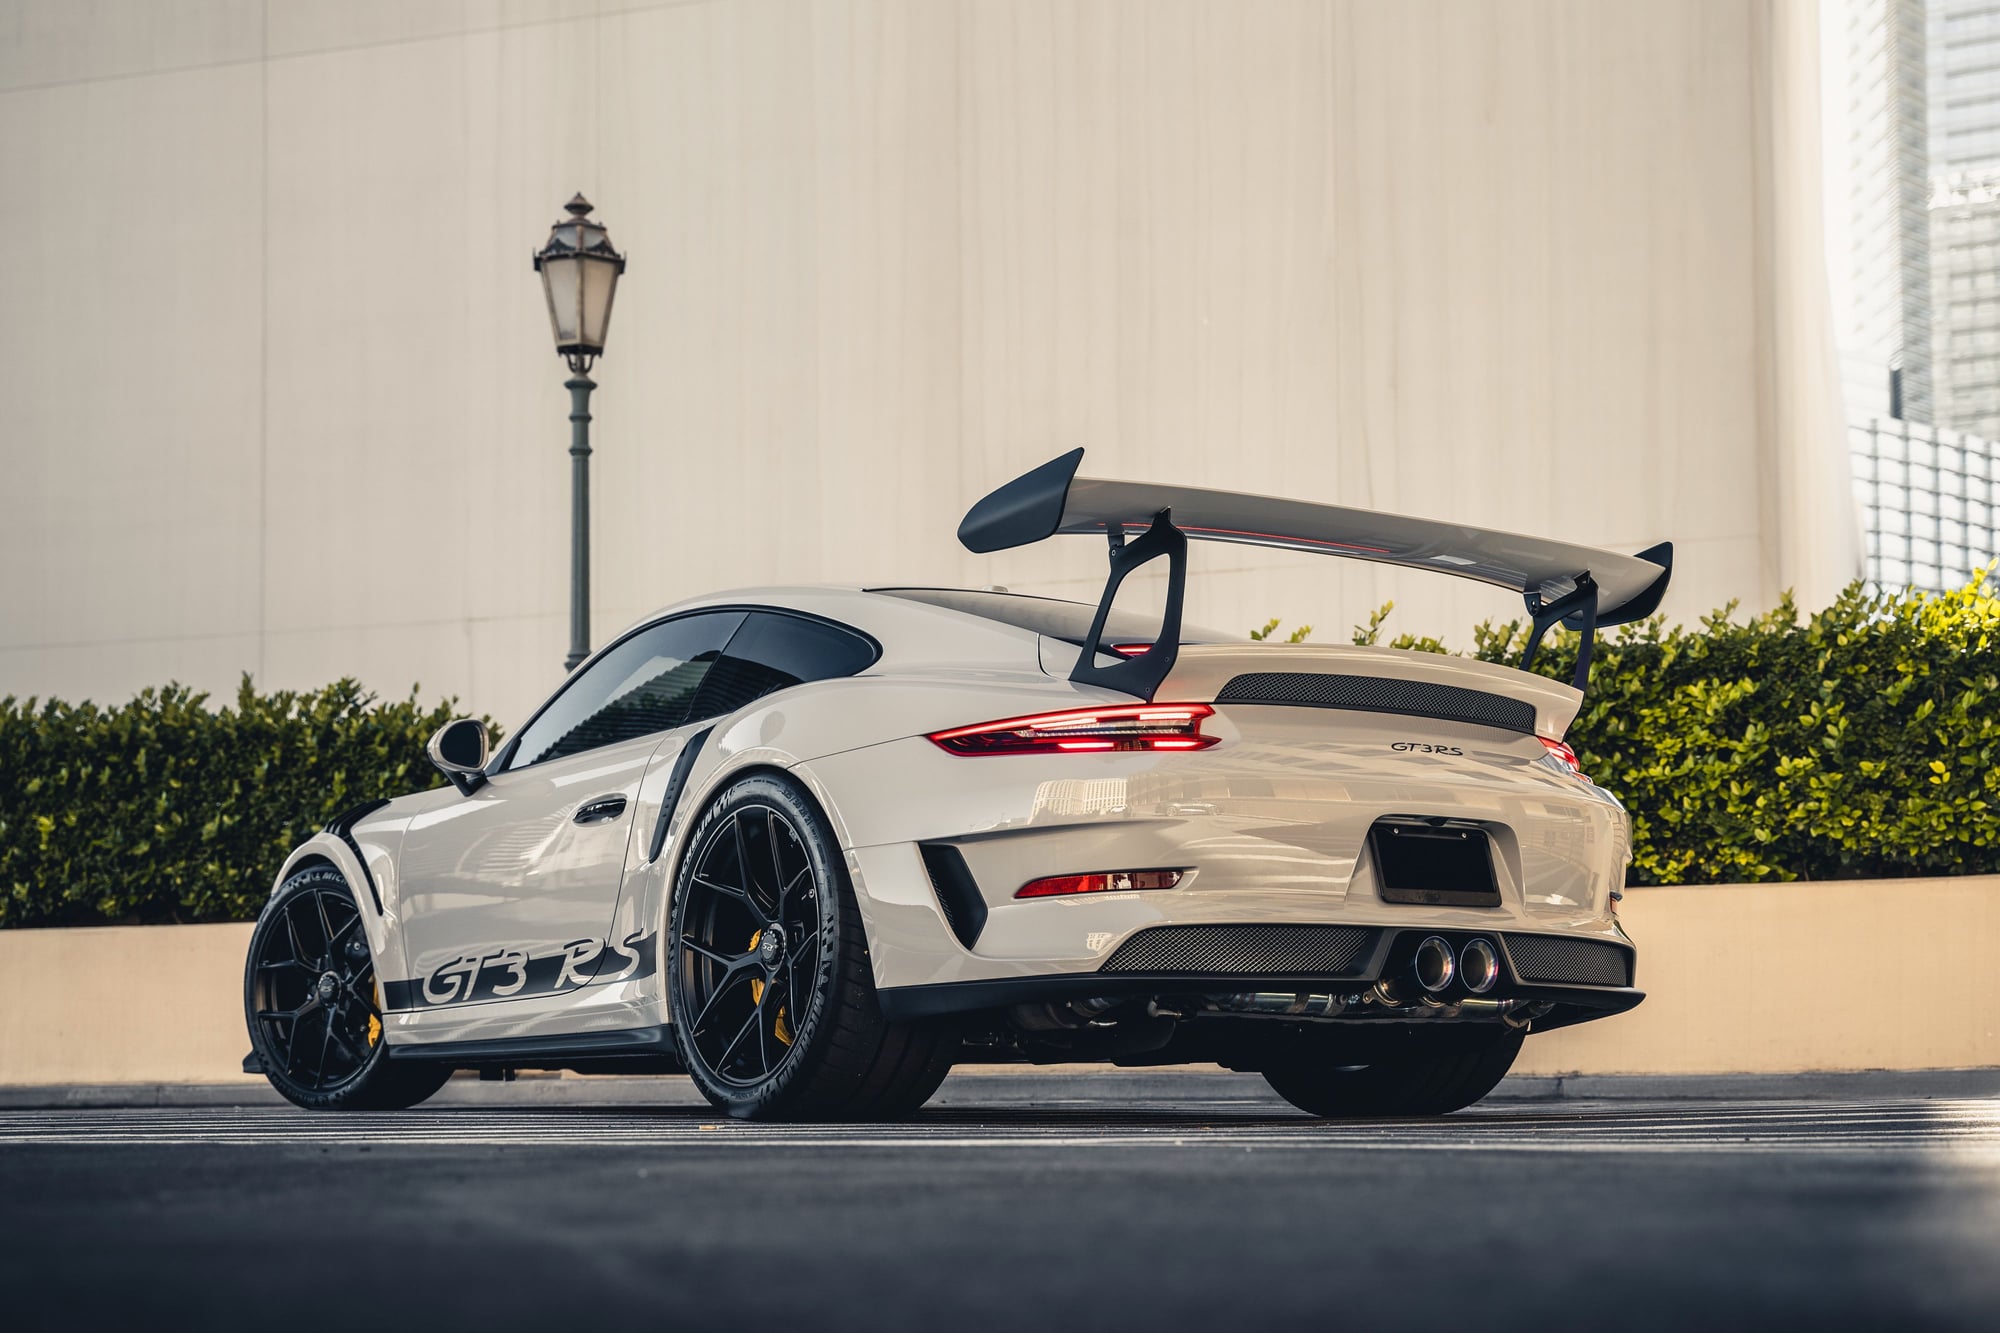 2019 Porsche GT3 - 991.2 GT3 RS For Sale: Chalk, <3400mi, 1 Owner, PCCB, FAL, Leather Int, Full PPF - Used - VIN WP0AF2A90KS165095 - 3,350 Miles - 6 cyl - 2WD - Automatic - Coupe - Gray - Las Vegas, NV 89144, United States